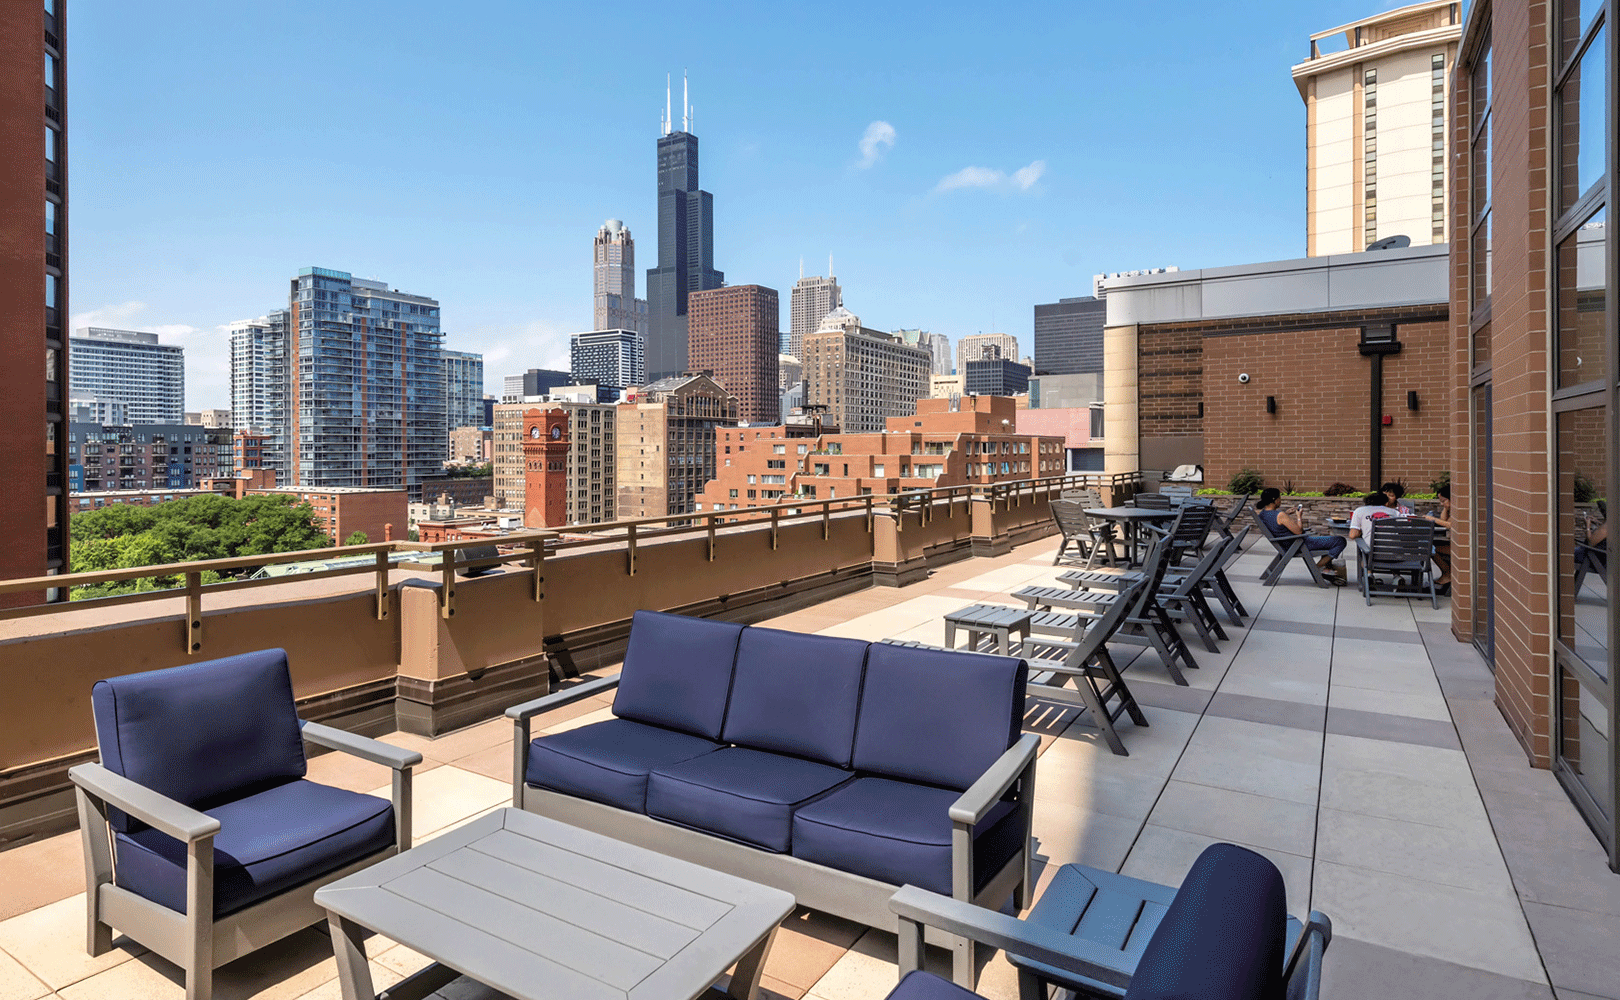 Rooftop lounge with patio furniture and grilling station overlooking down town Chicago and the Sear's Tower